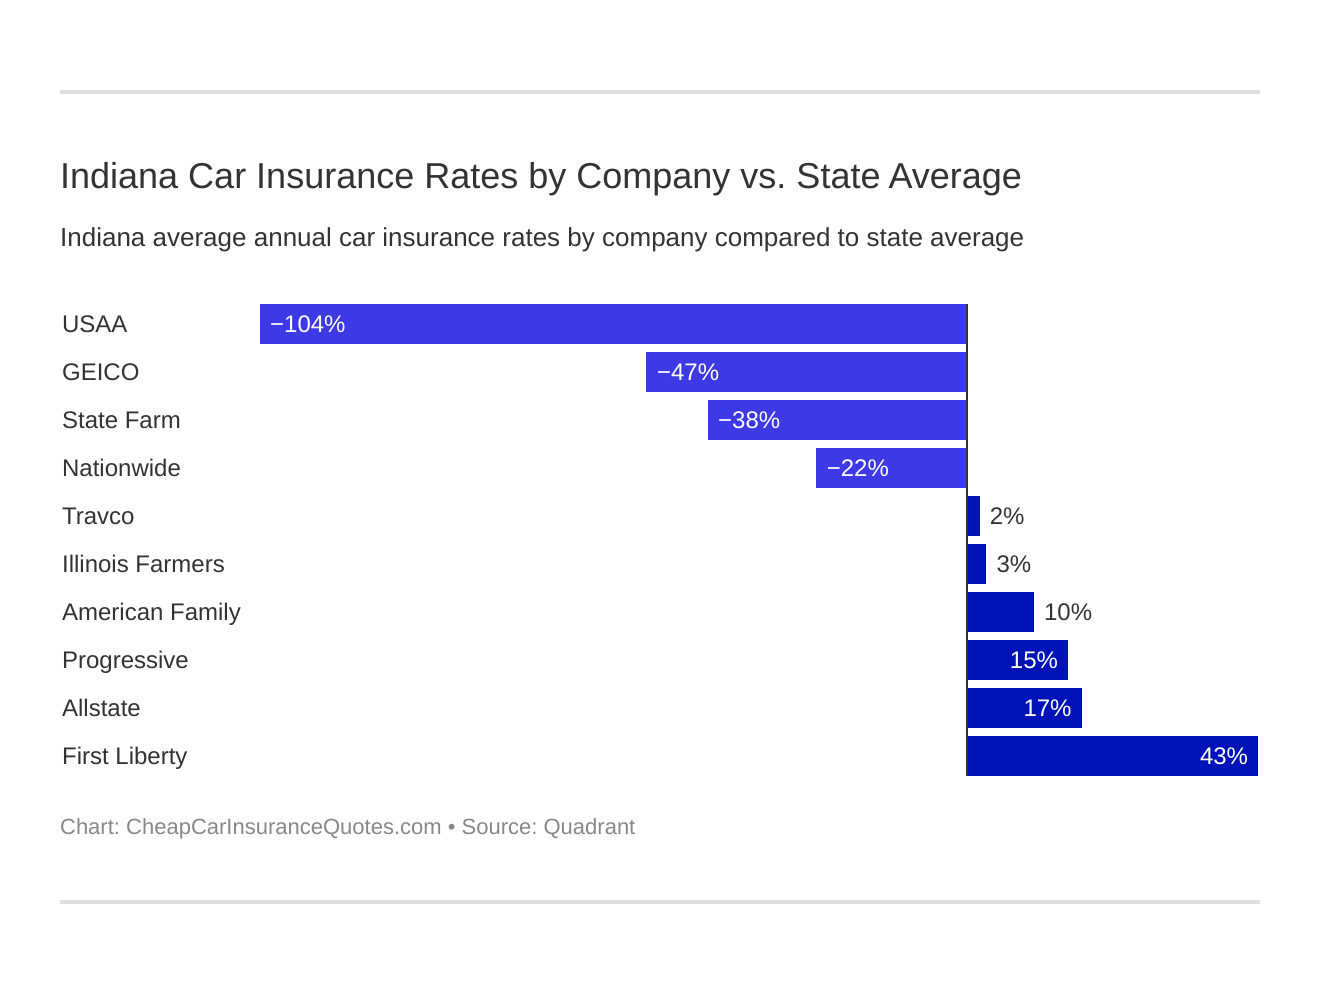 Indiana Car Insurance Rates by Company vs. State Average